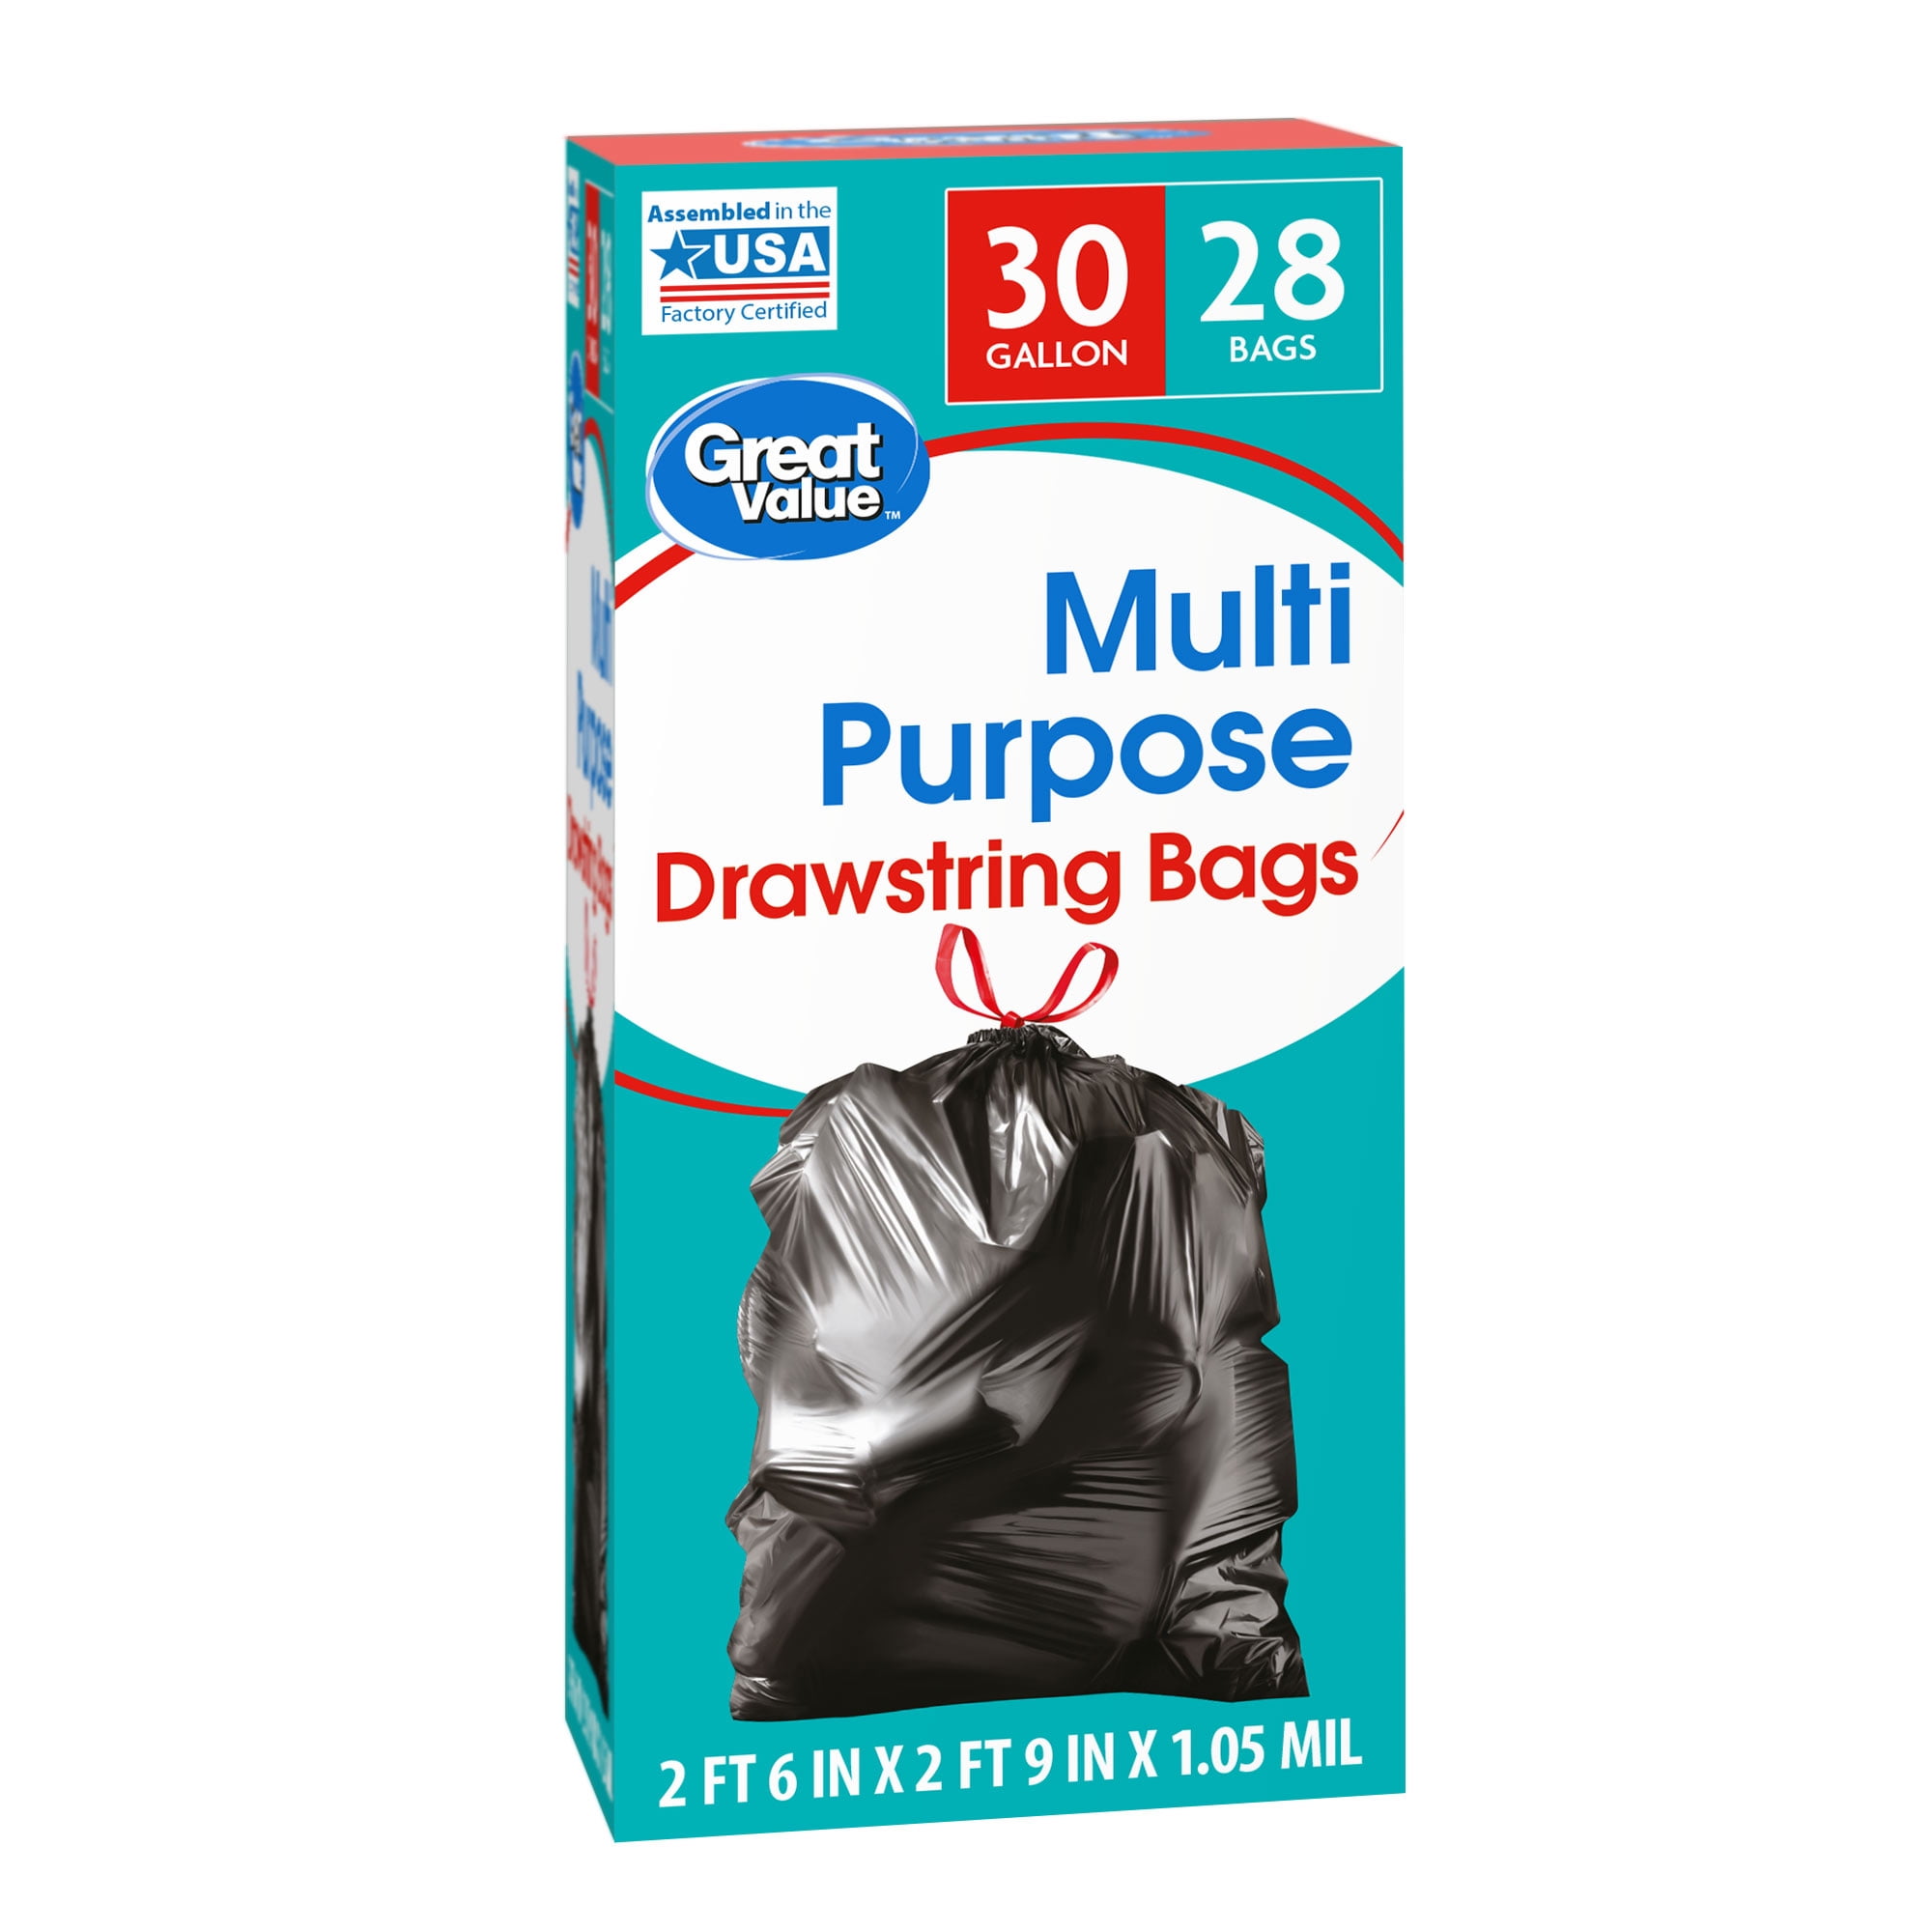 Signature SELECT Large Trash Bags With Drawstring 30 Gallon - 55 Count -  Jewel-Osco